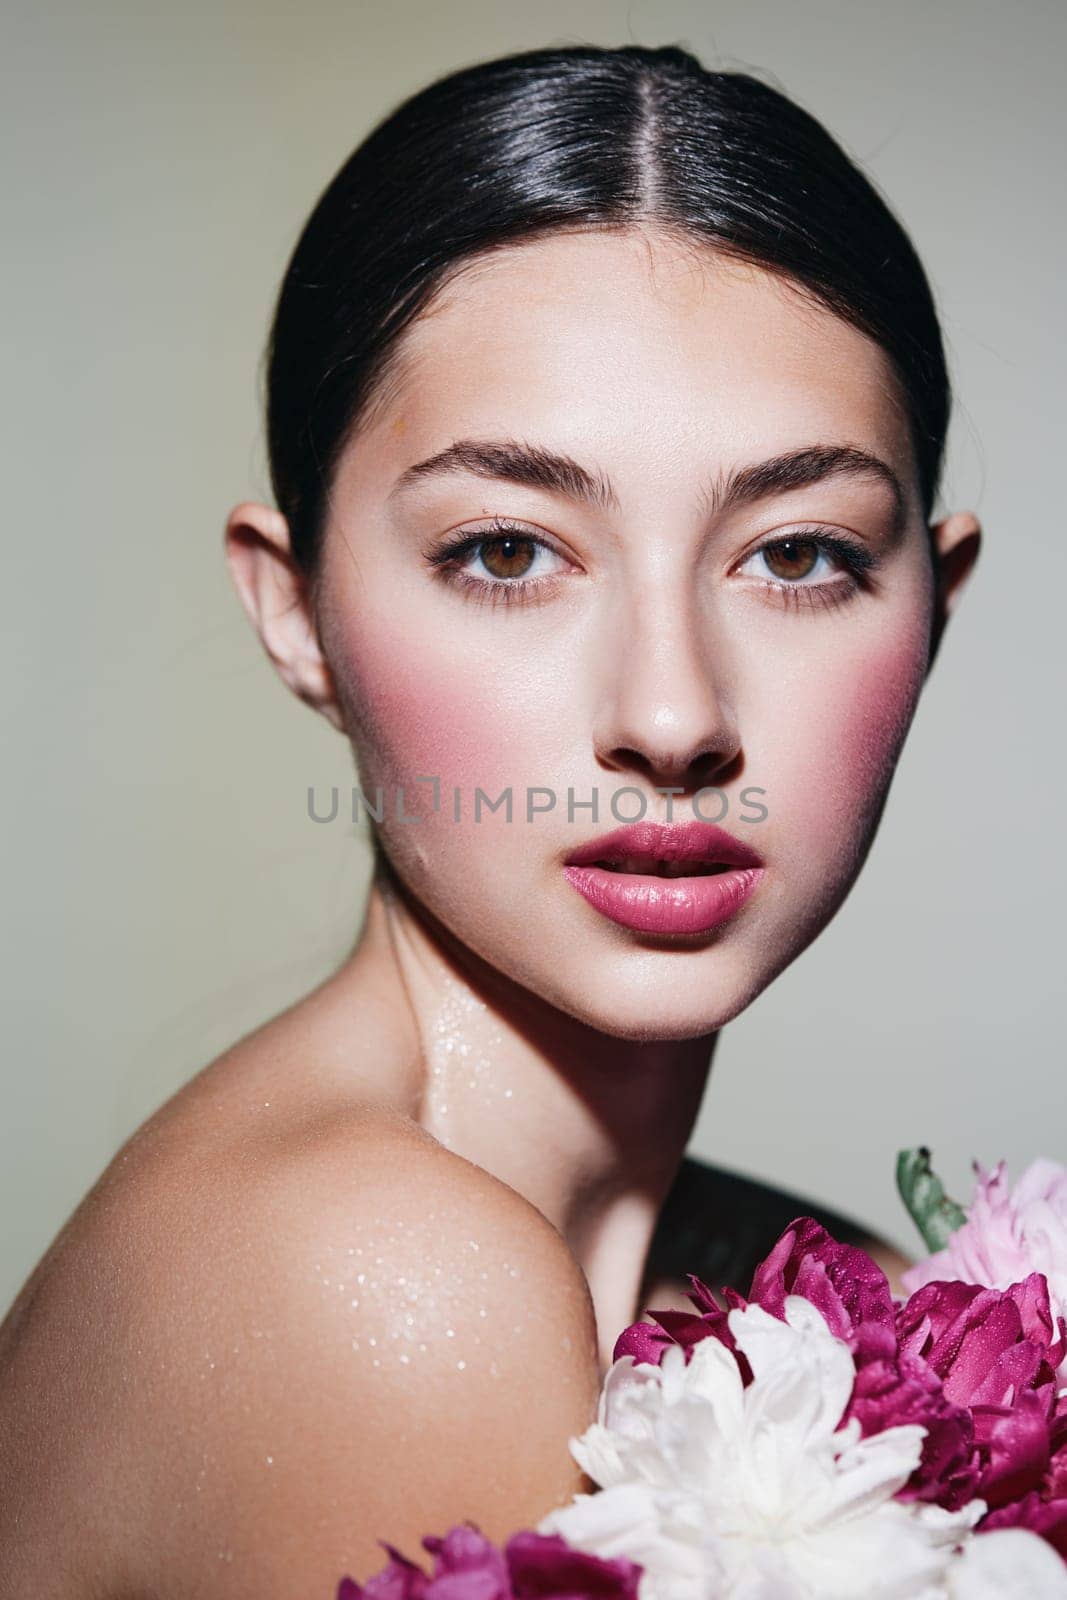 woman make-up face cosmetic portrait girl romantic fashion flower eye beauty concept spring pink white closeup model person blush natural femininity